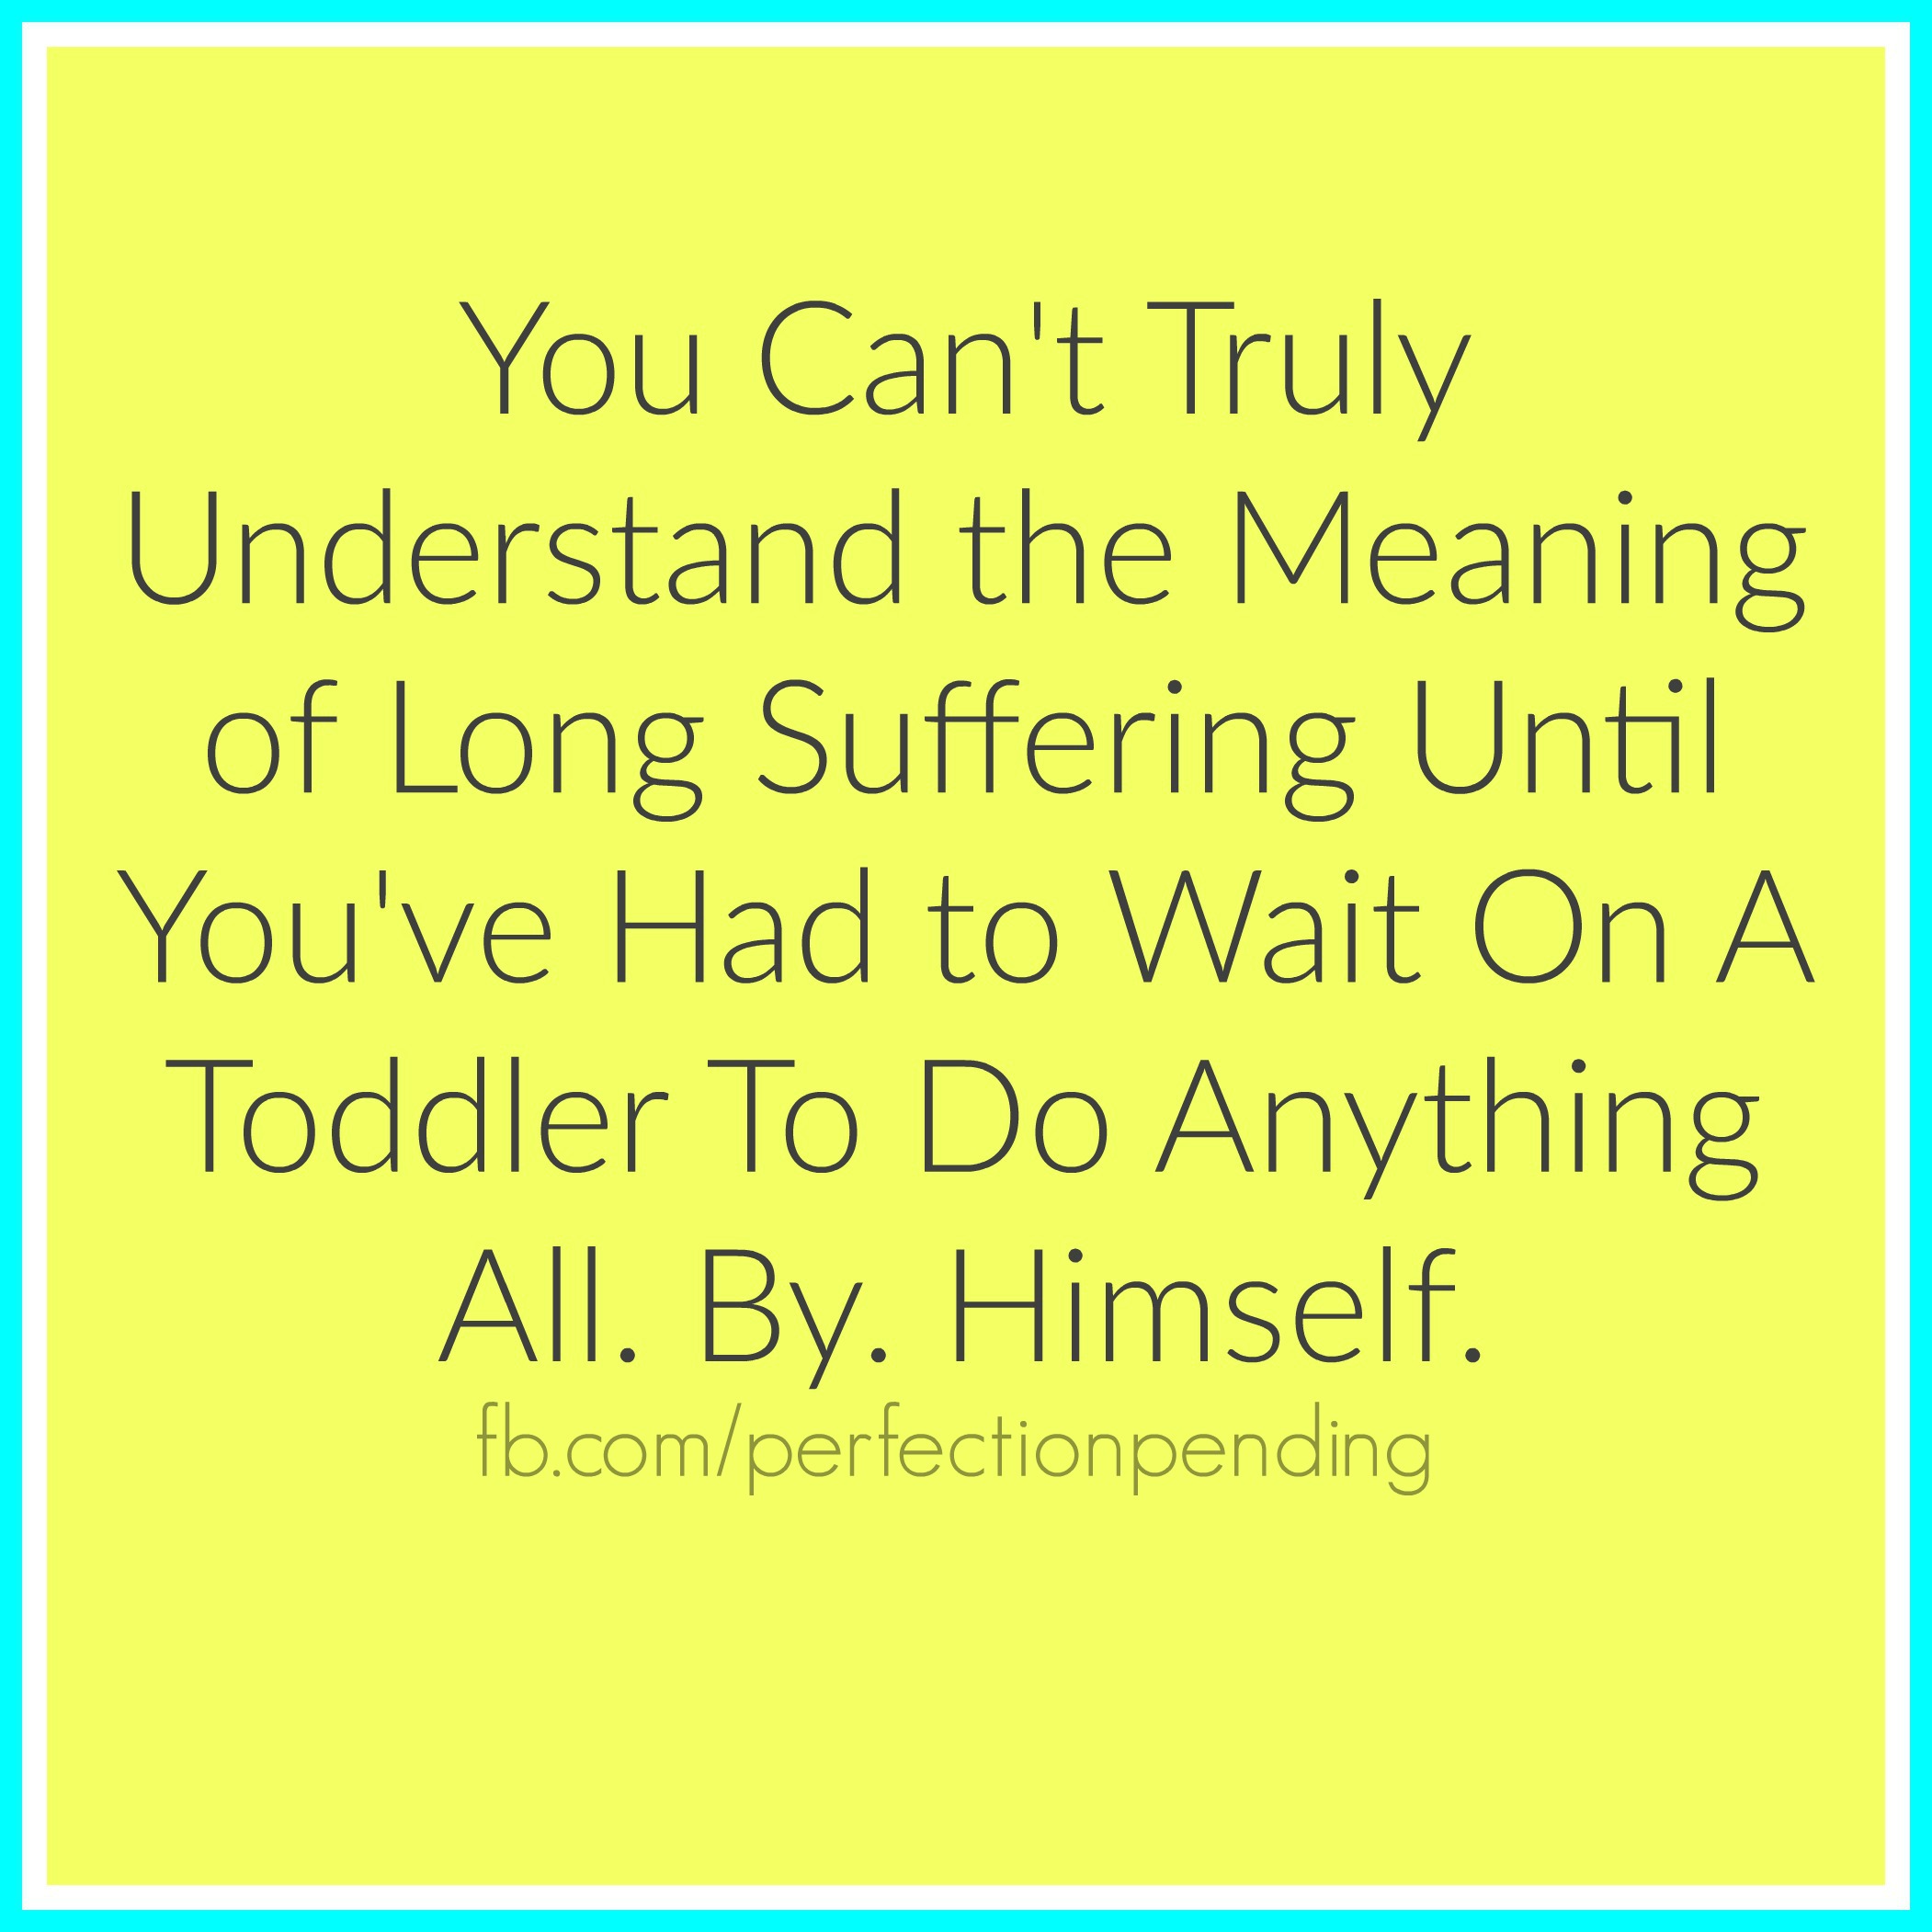 The True Meaning of Long Suffering - Perfection Pending